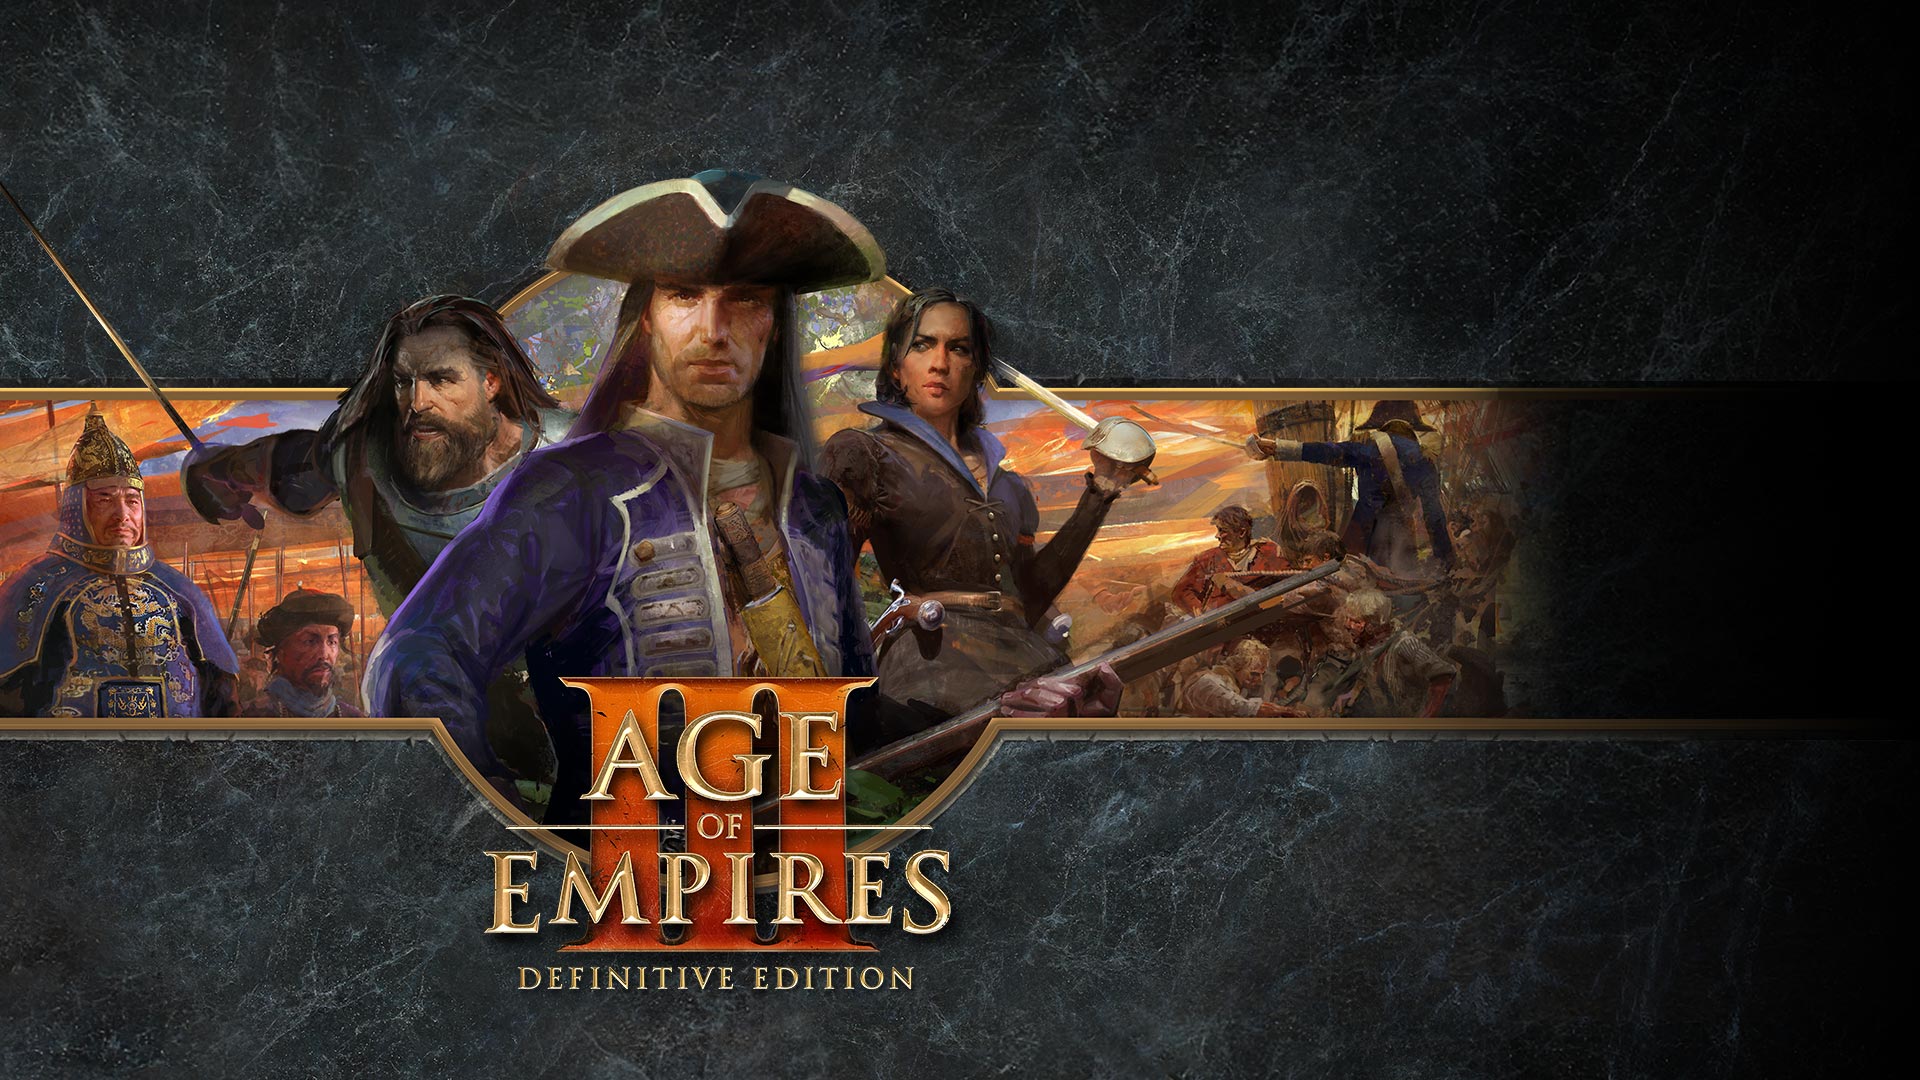 Age of Empires III: Definitive Edition, posierende Charaktere